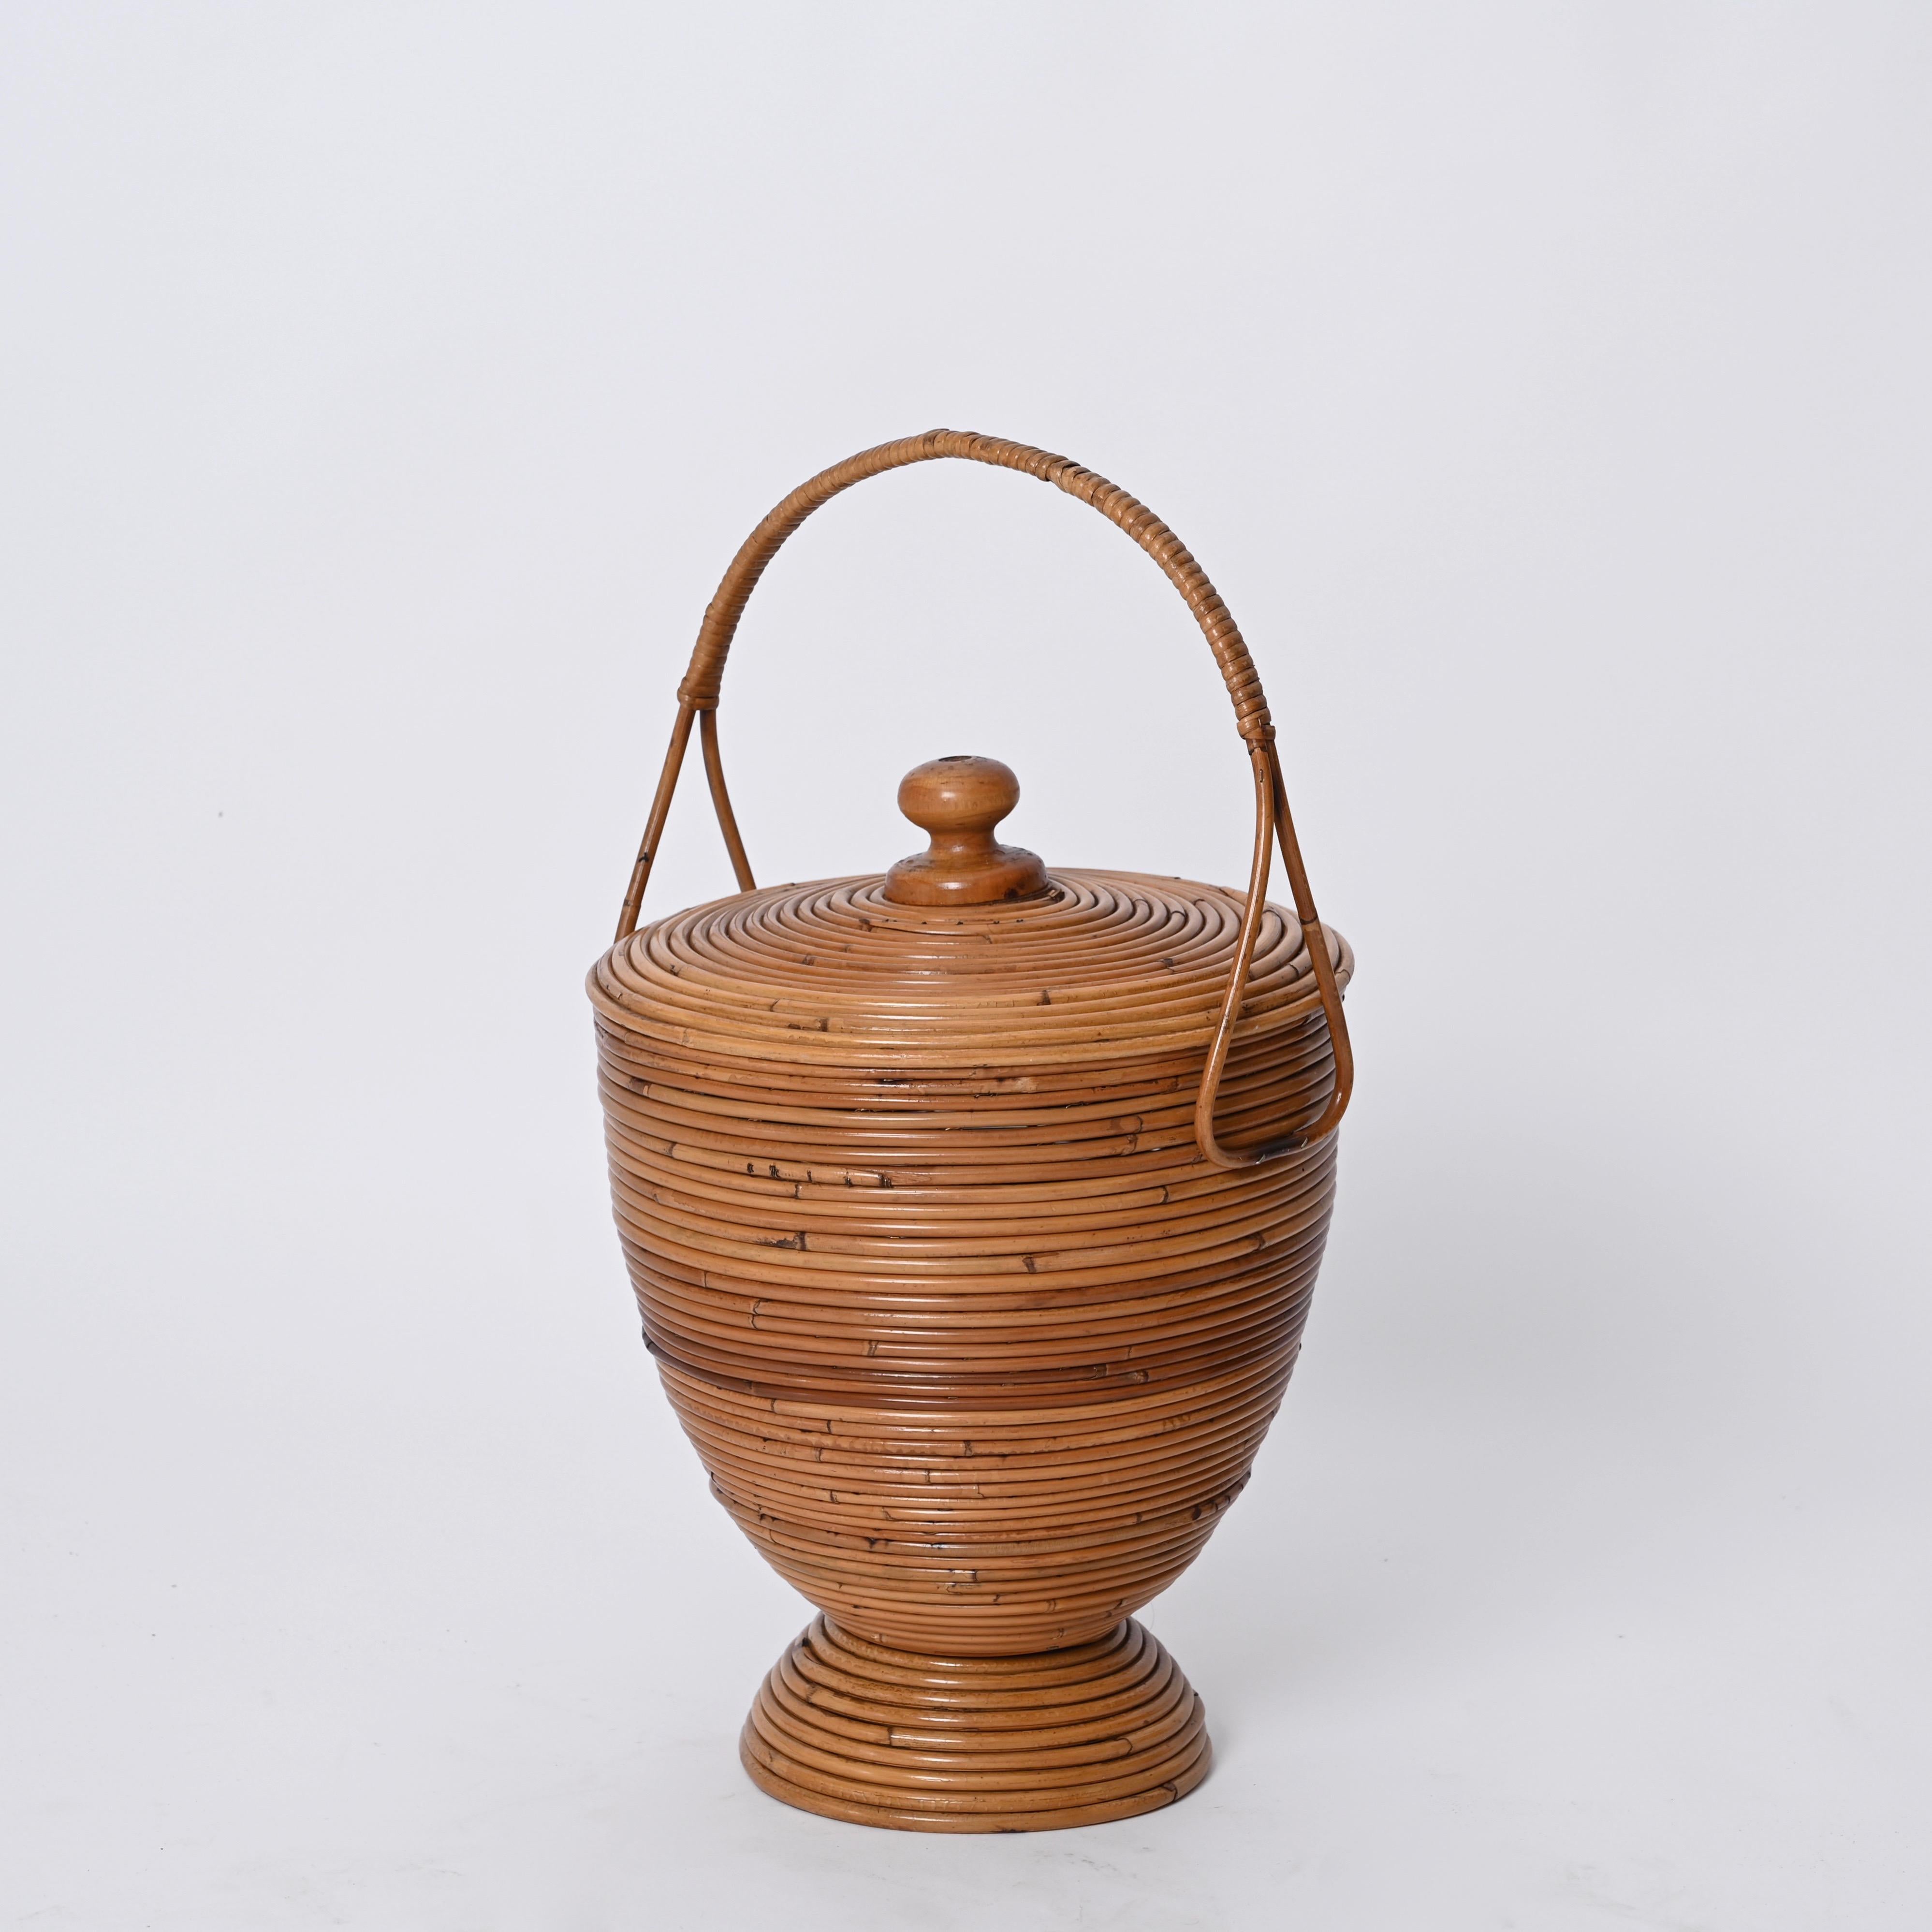 20th Century Mid-Century Decorative Basket in Rattan and Wicker by Vivai del Sud, Italy 1970s For Sale